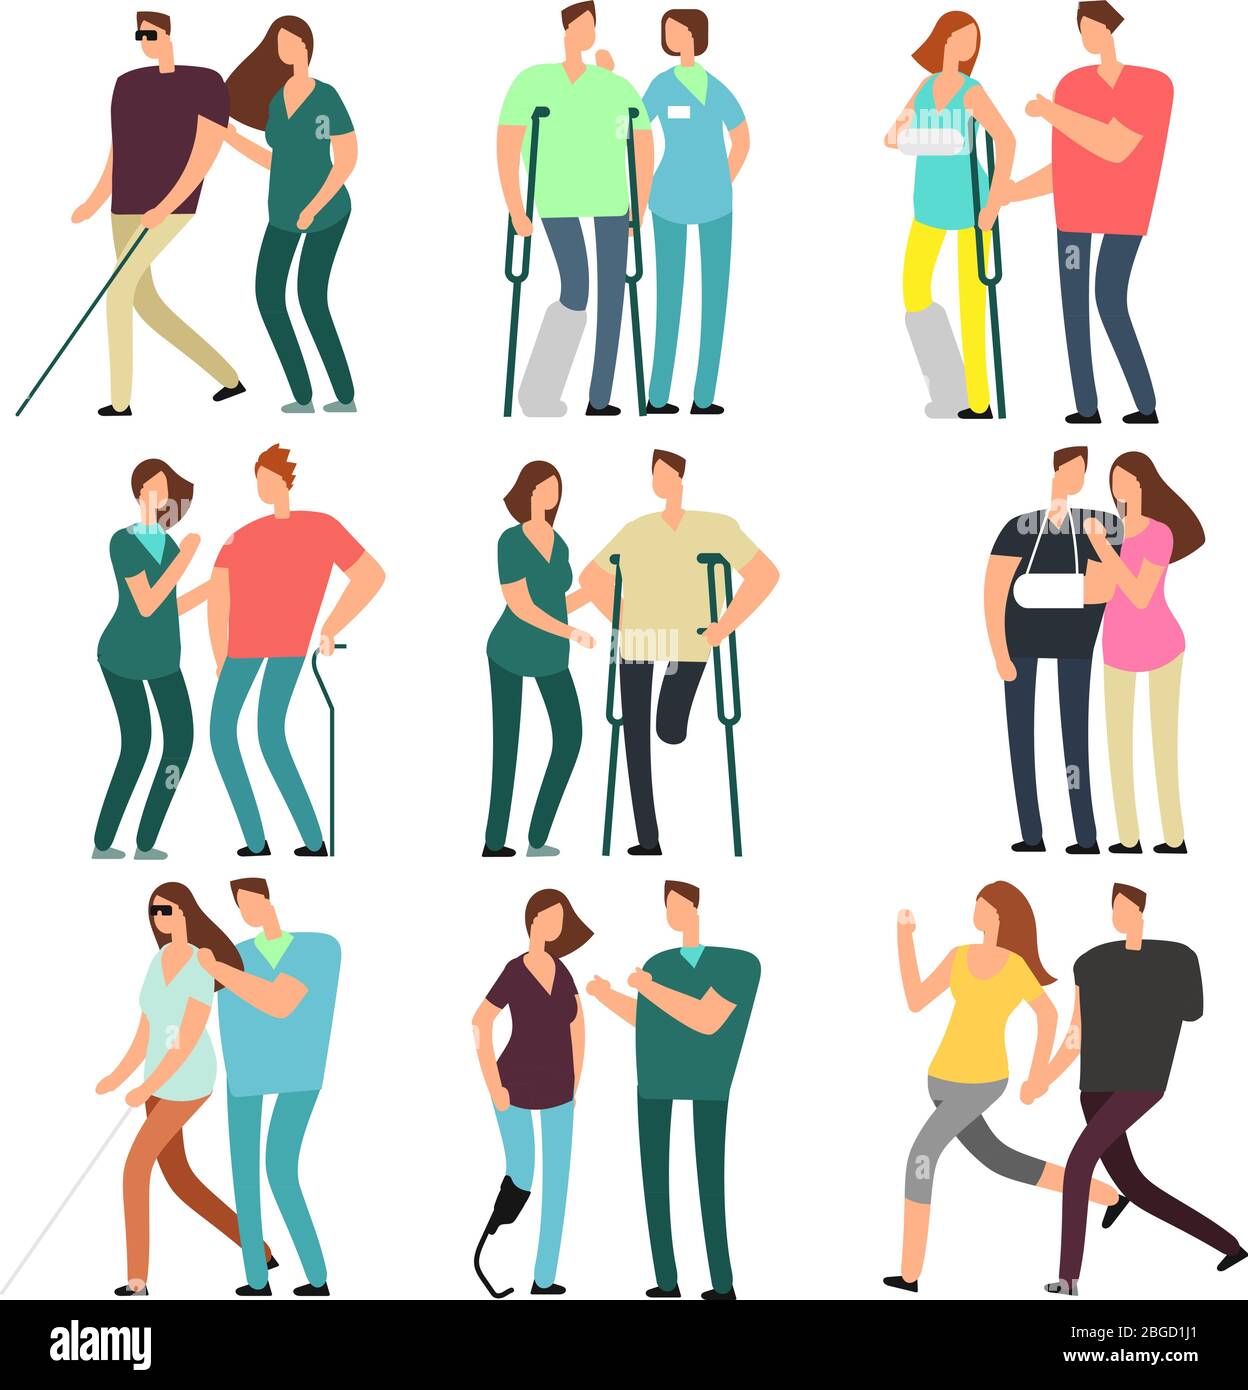 Disabled people with caring friends. Handicapped persons and medical assistants. Character disability patient walking, assistance and care friend. Vector illustration Stock Vector